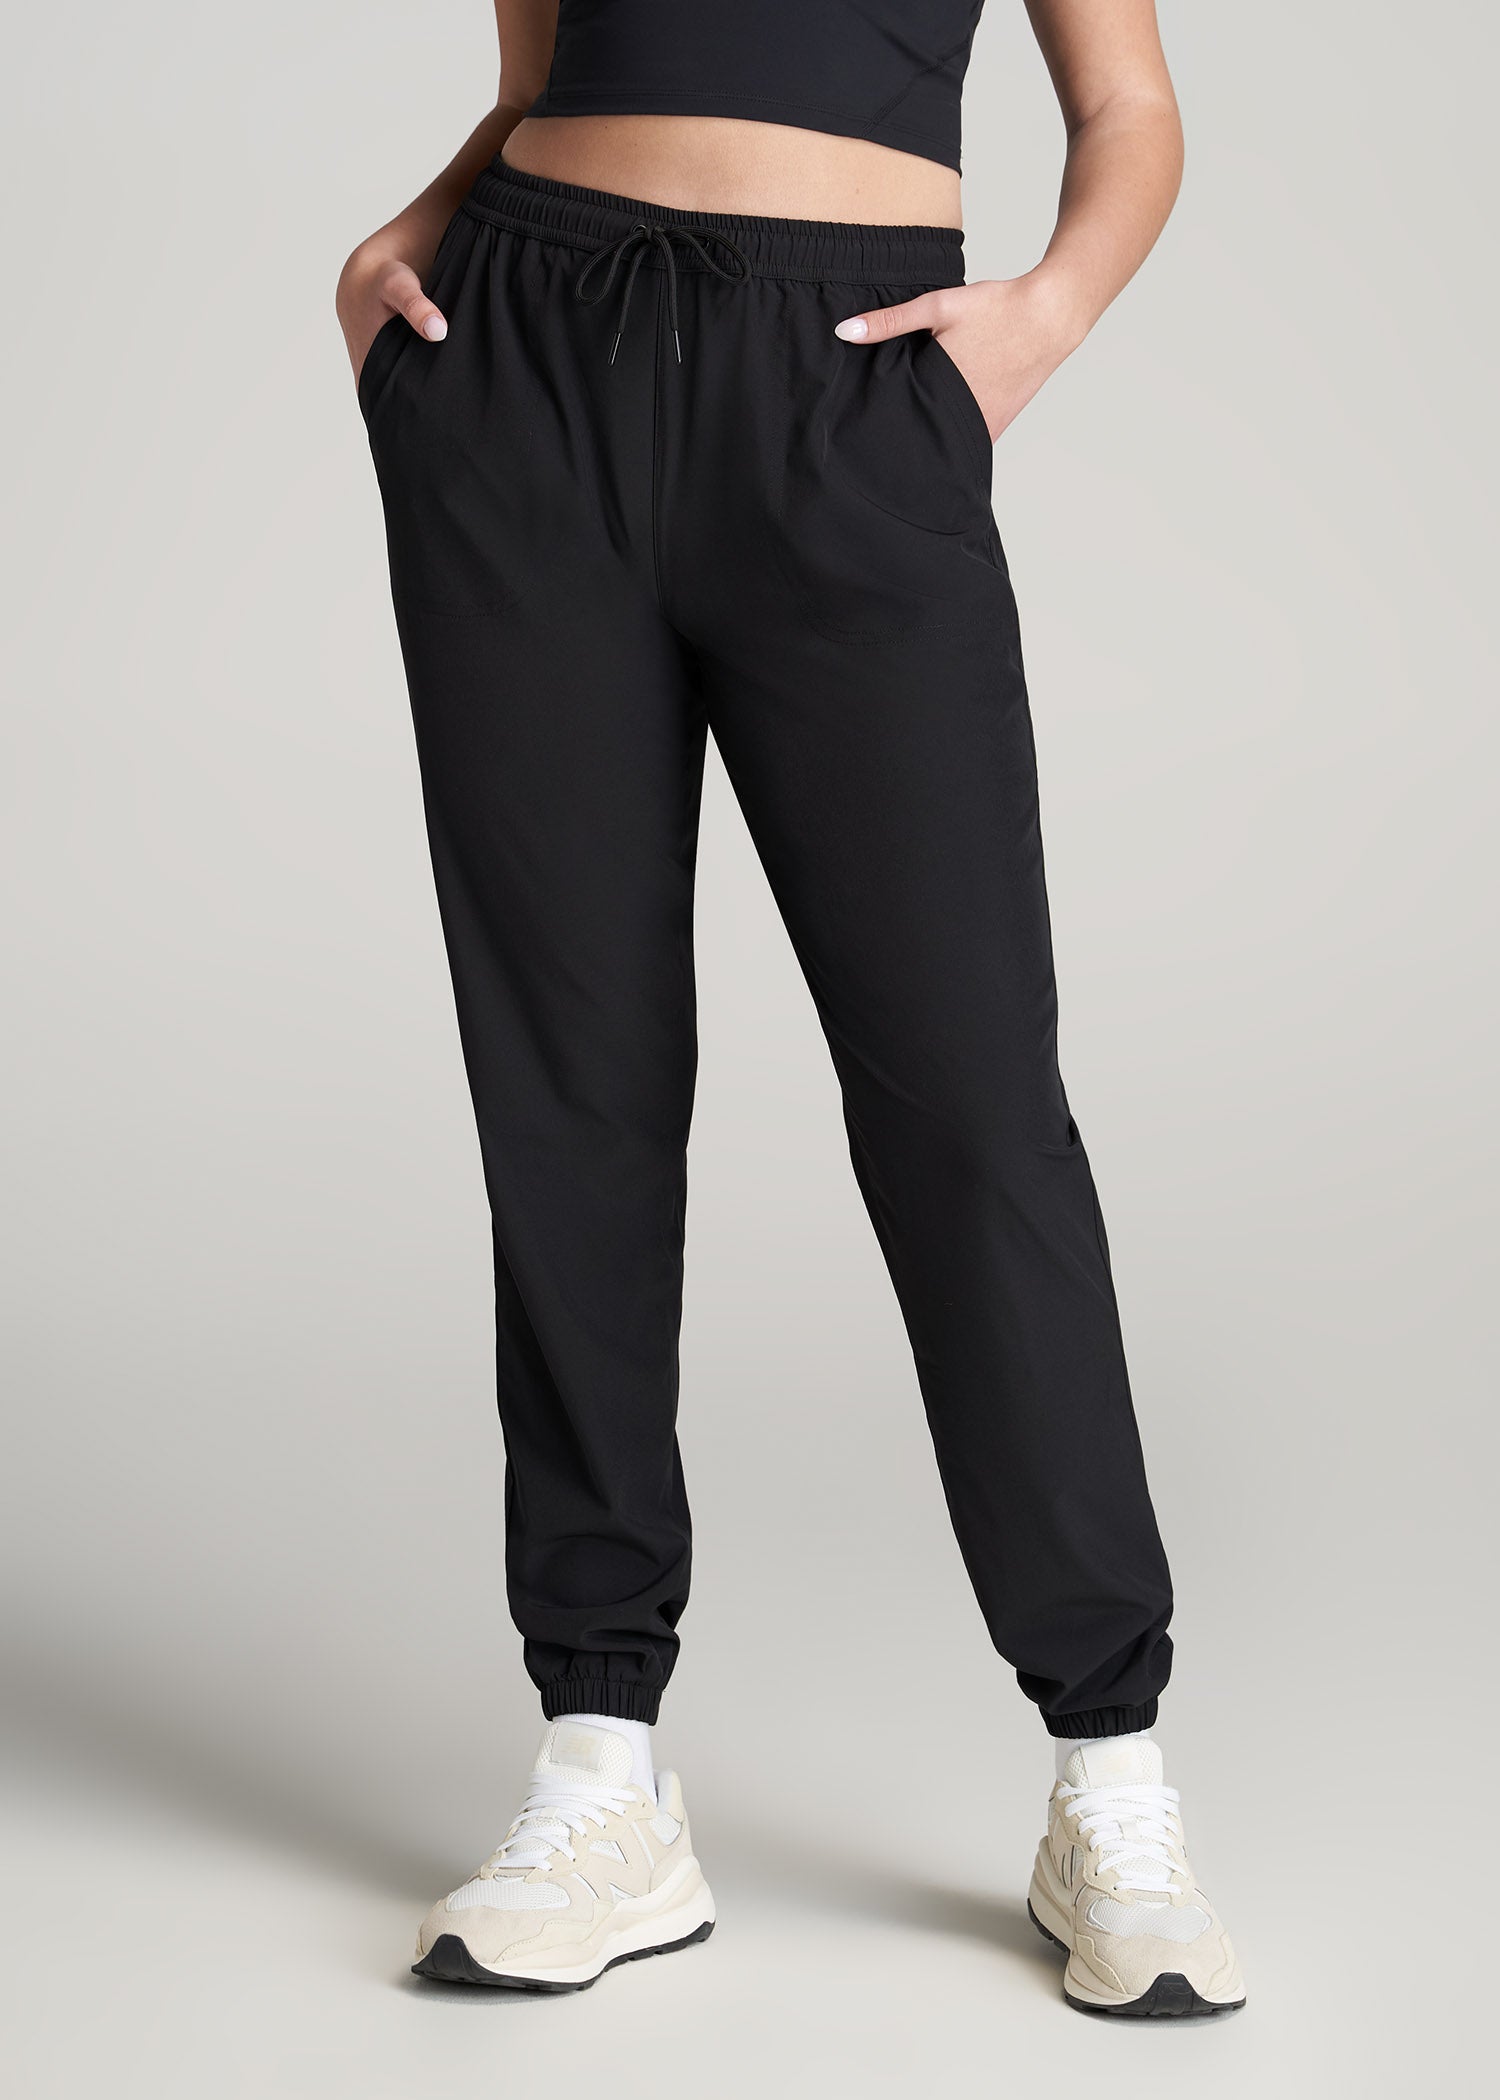 Hybrid Joggers for Tall Women in Black M / Tall / Black